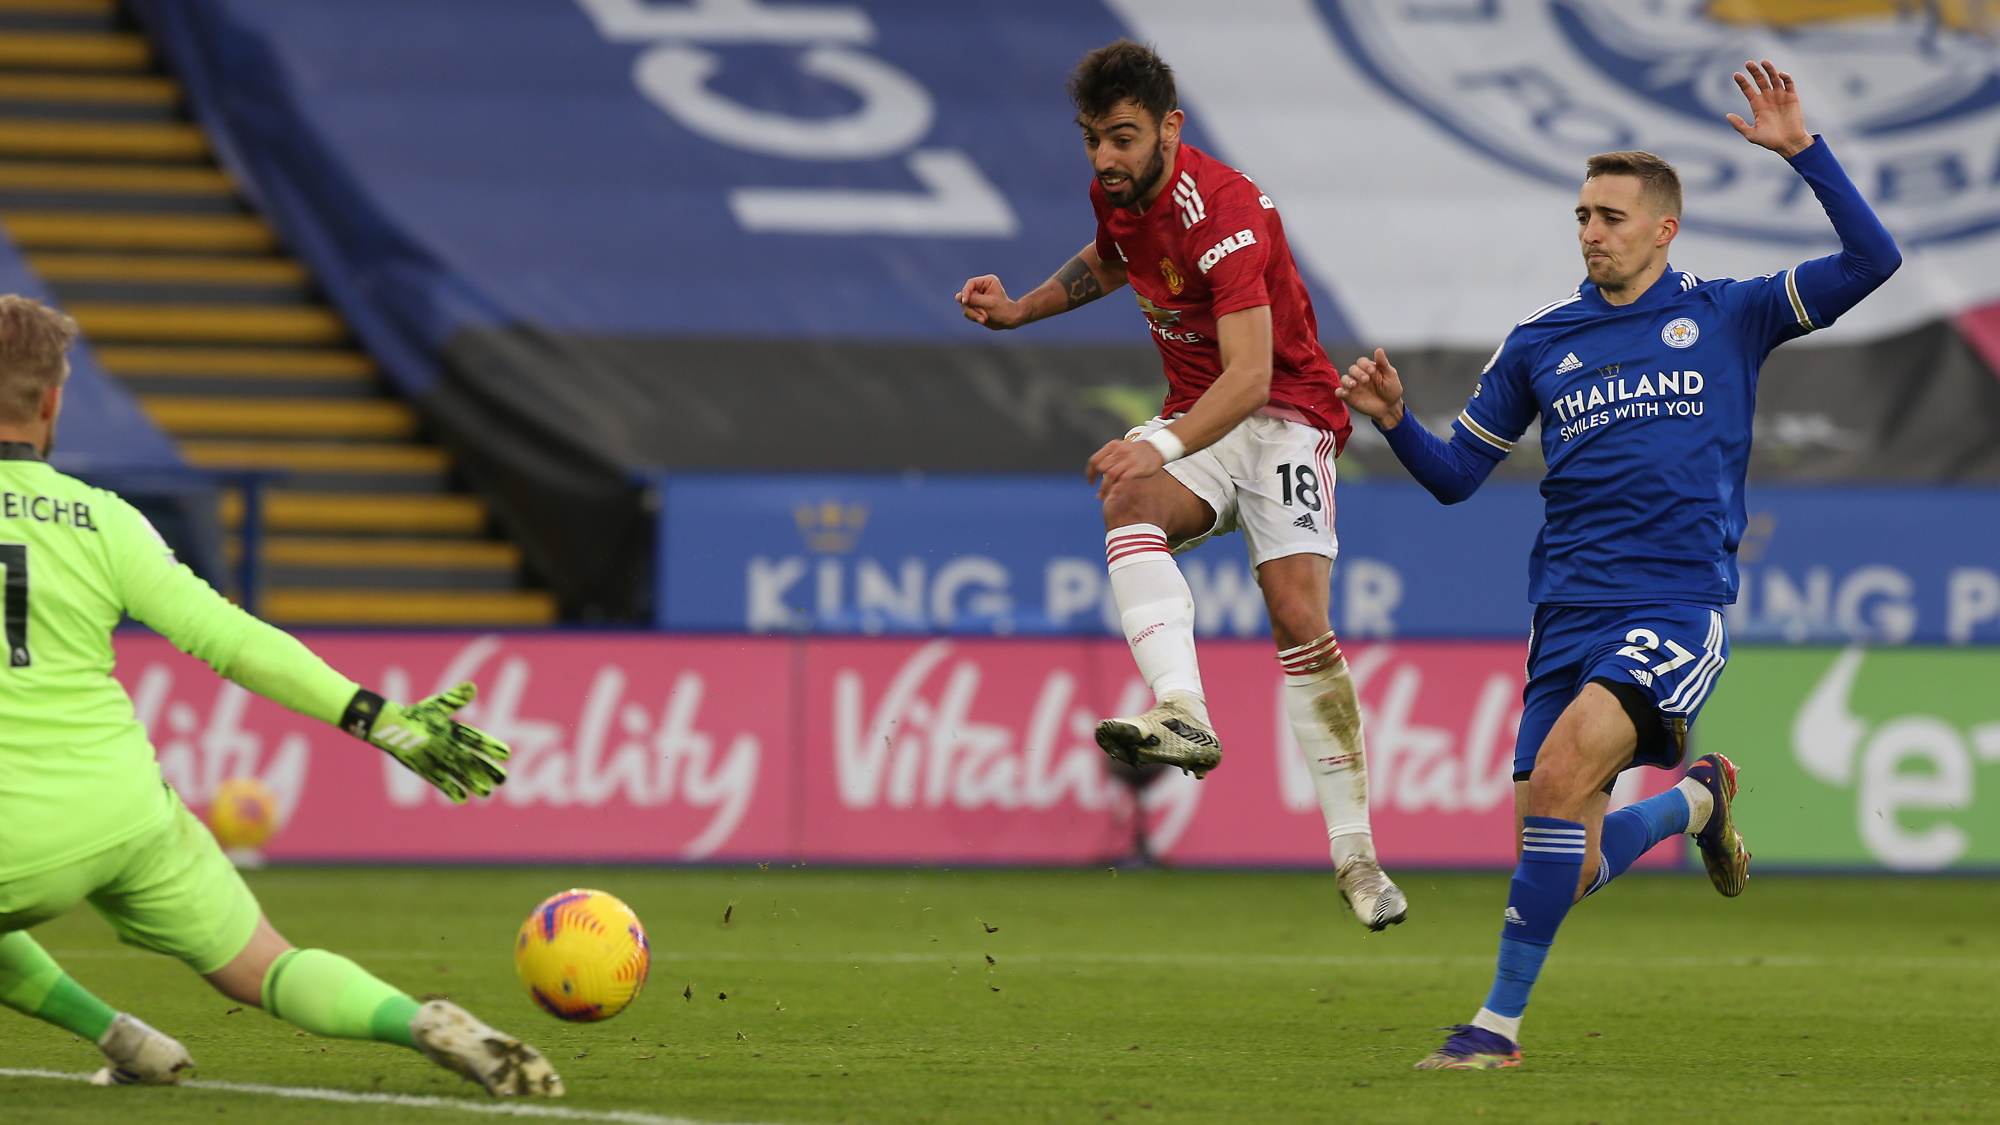 Leicester City vs Man United live stream how to watch FA Cup quarter